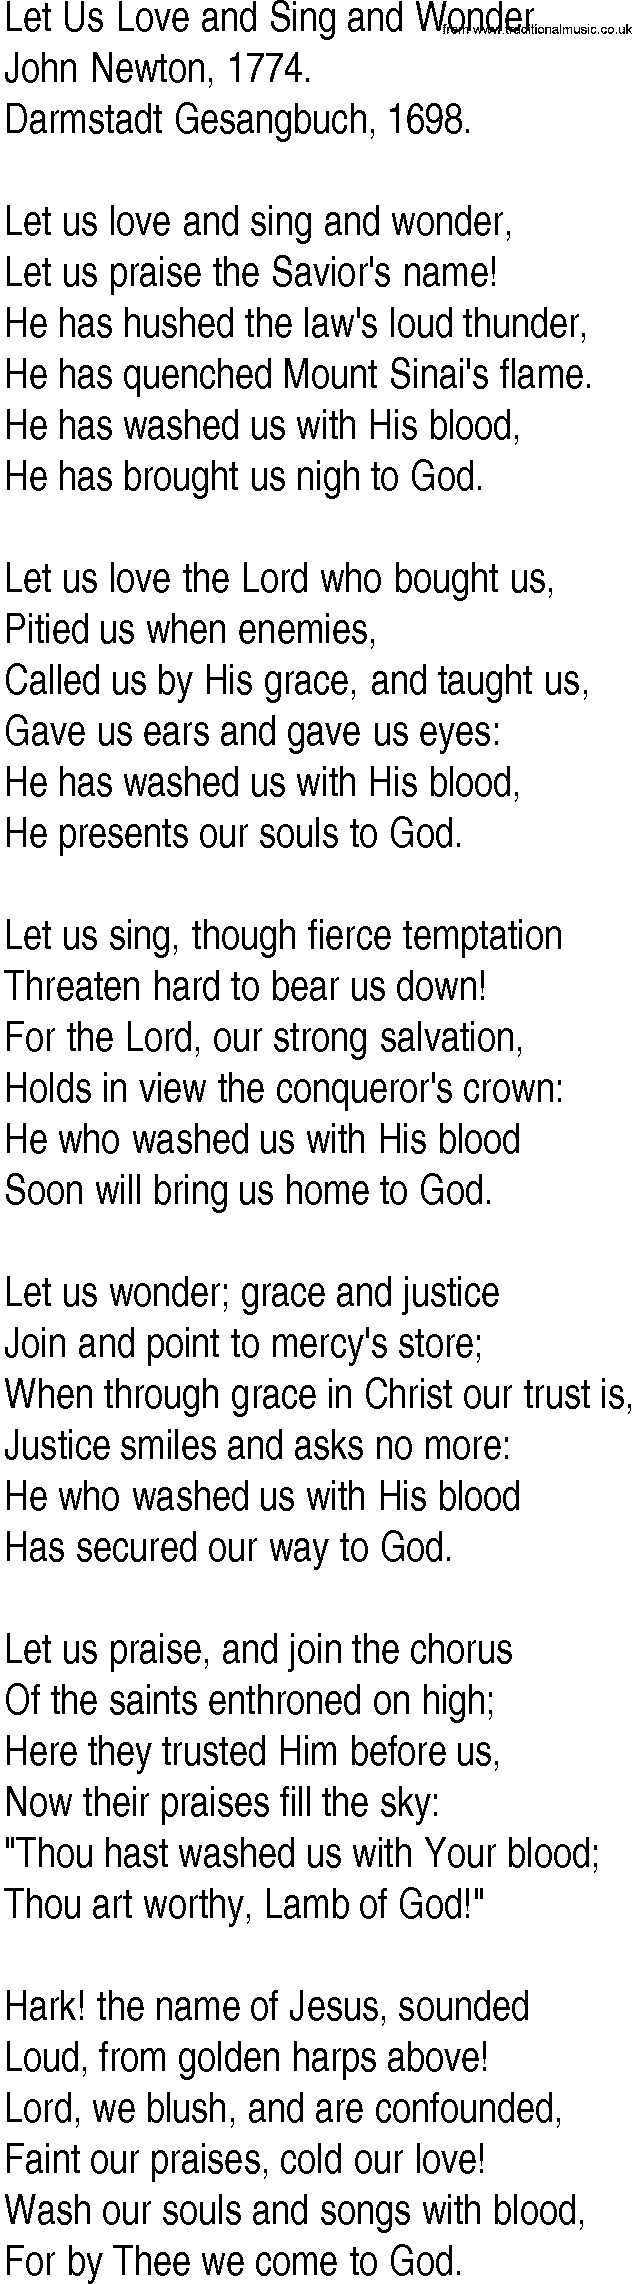 Hymn and Gospel Song: Let Us Love and Sing and Wonder by John Newton lyrics